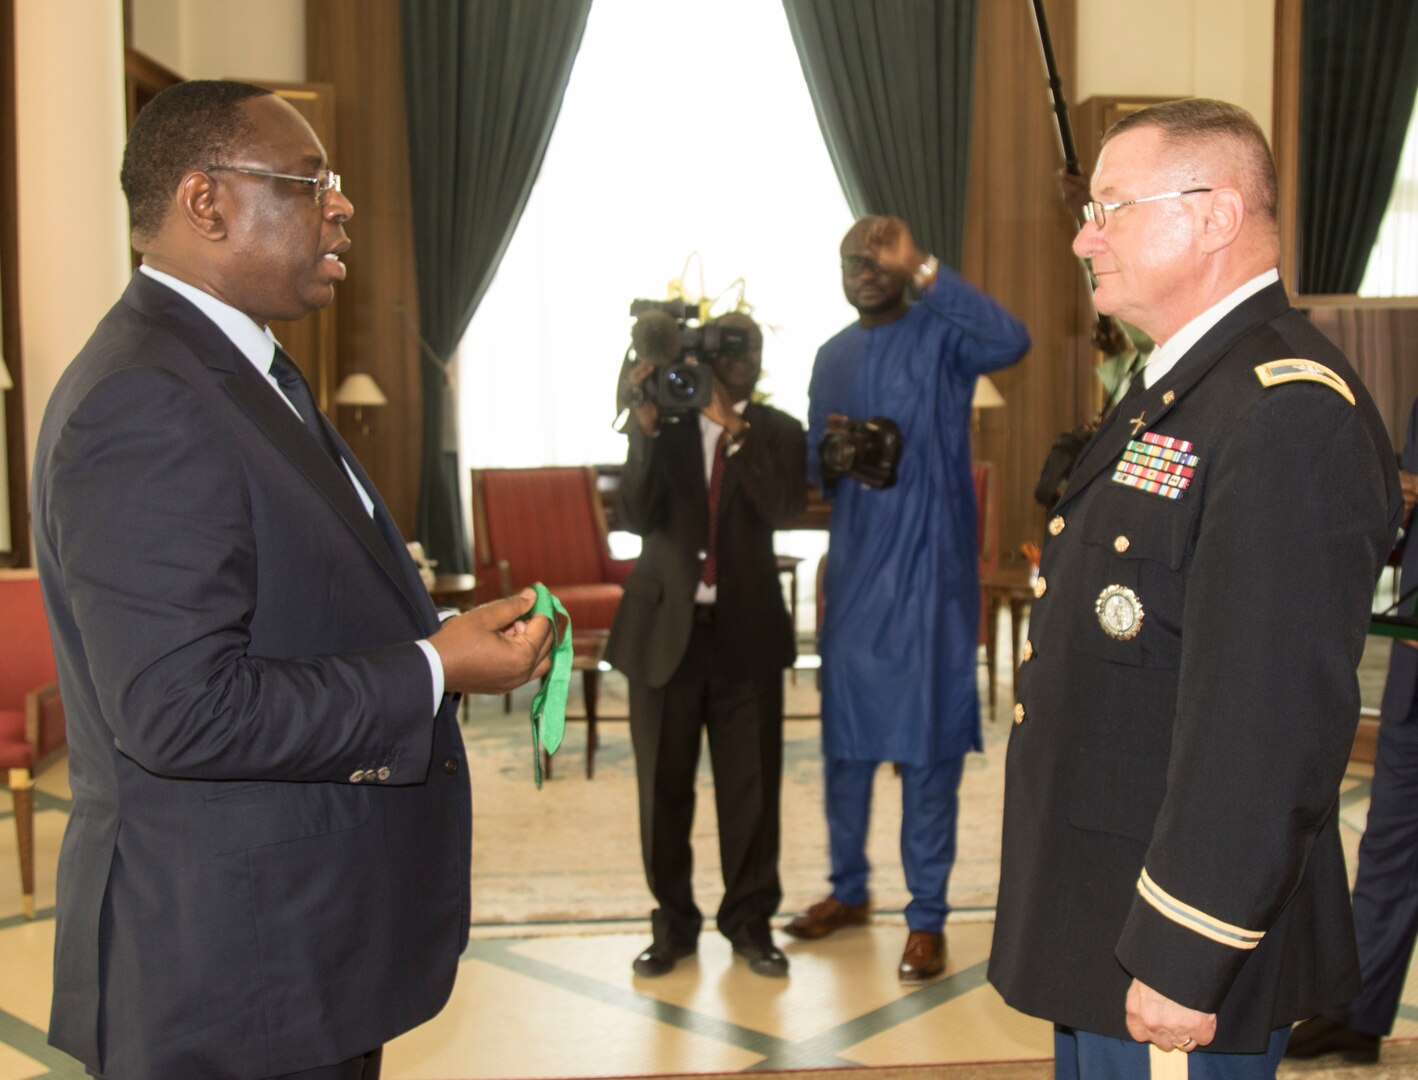 Vermont Adjutant General Col. Gregory Knight receives the Presidential Order of the Lion from President Macky Sall on July 4th, at the presidential palace in Dakar, Senegal. The Vermont National Guard and Senegal have been partners for eleven years in the State Partnership Program administered by the United States National Guard Bureau. (Photo by U.S. Army National Guard Sgt. 1st Class Jason Alvarez)